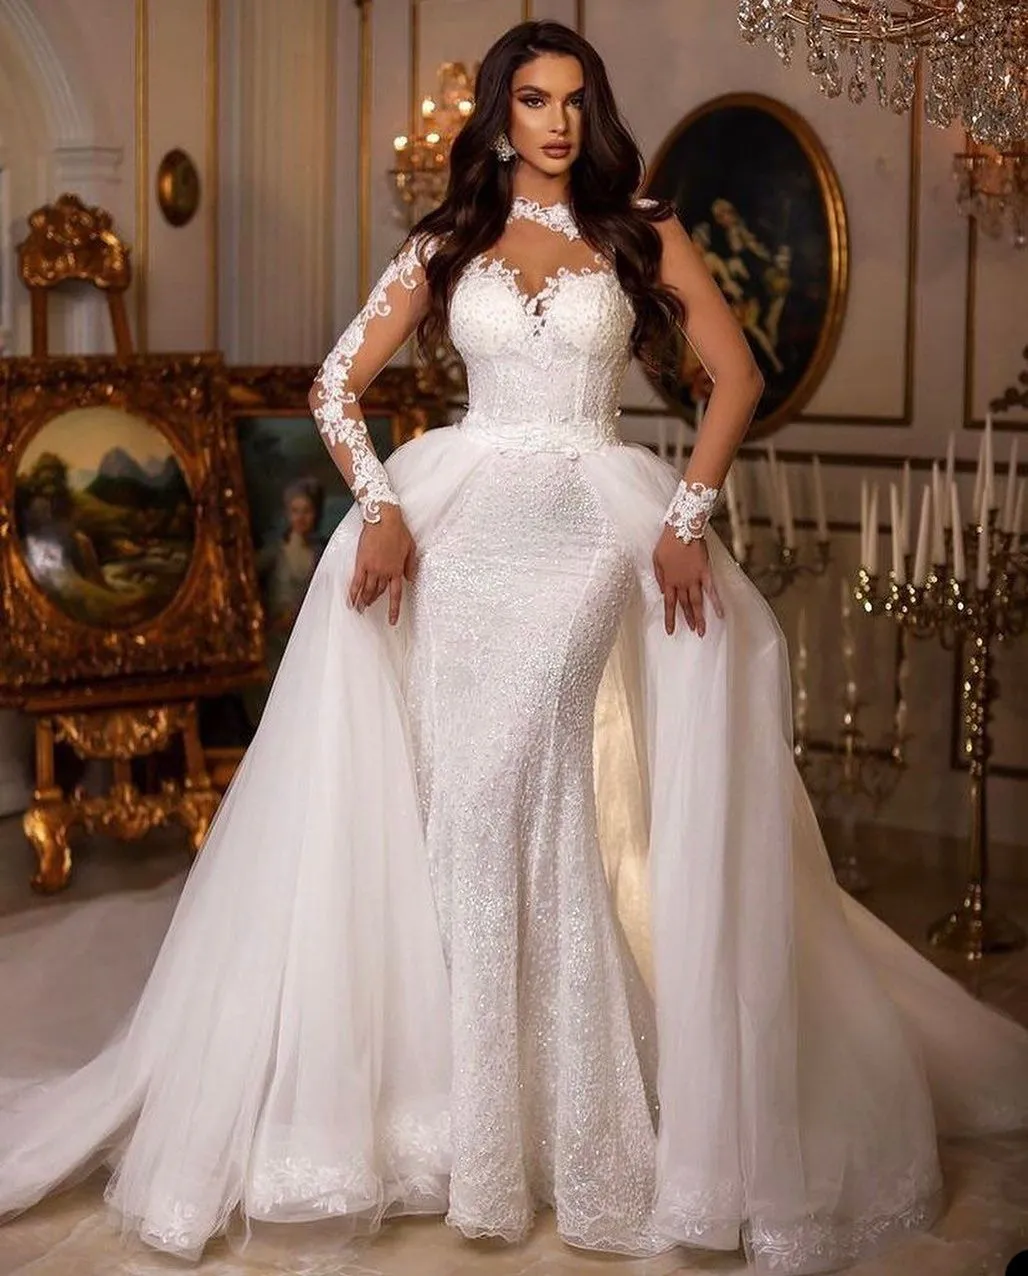 Sexy Mermaid Wedding Dress Illusion Jewel Neck Long Sleeve Lace Appliques Bridal Gowns With Detachable Train Robe De Soiree